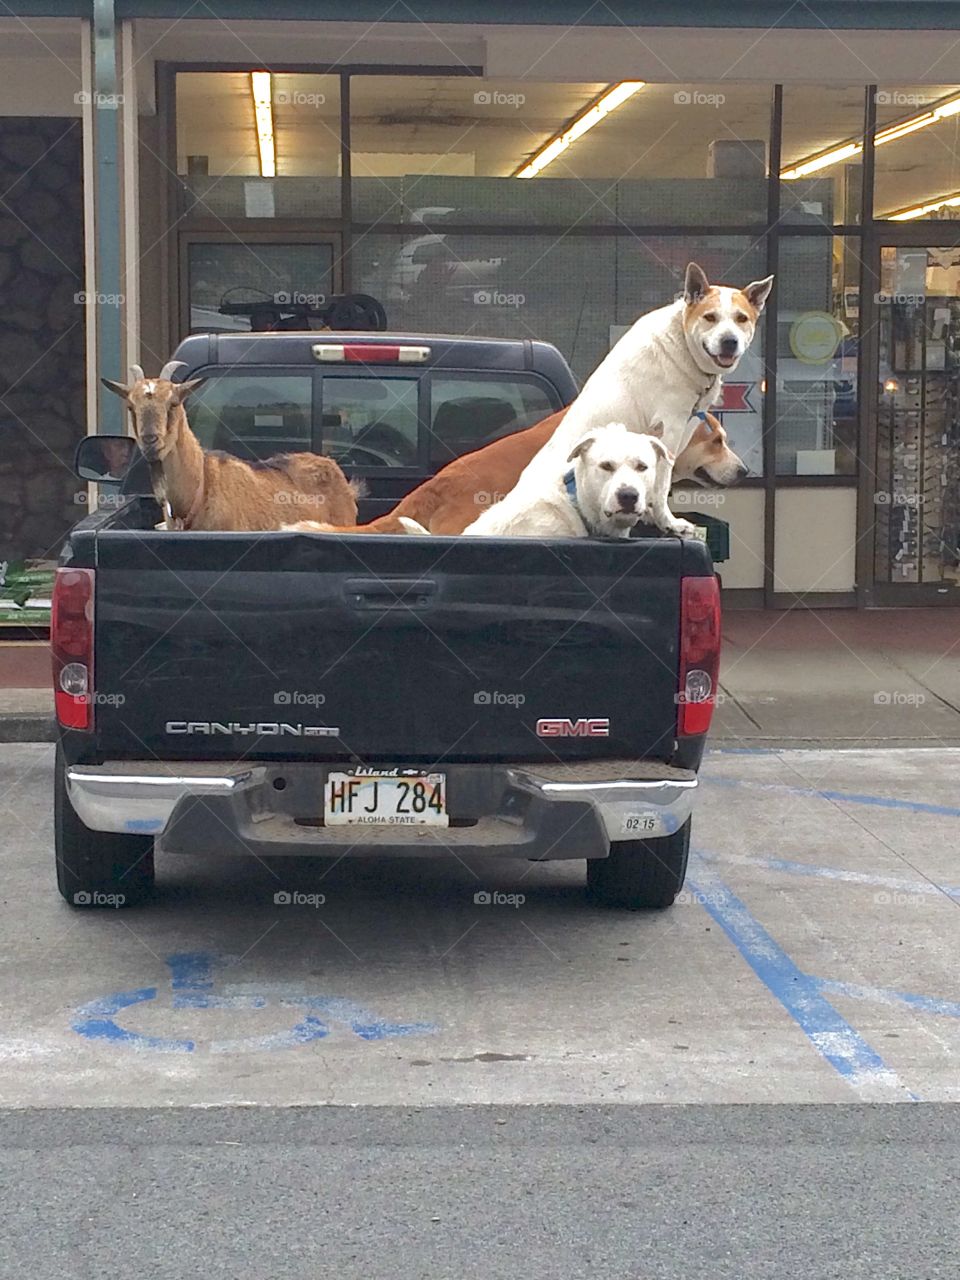 Animal love. Goat dogs truck Hawaii store parked getting around hysterical Man and his bestfriends animals love